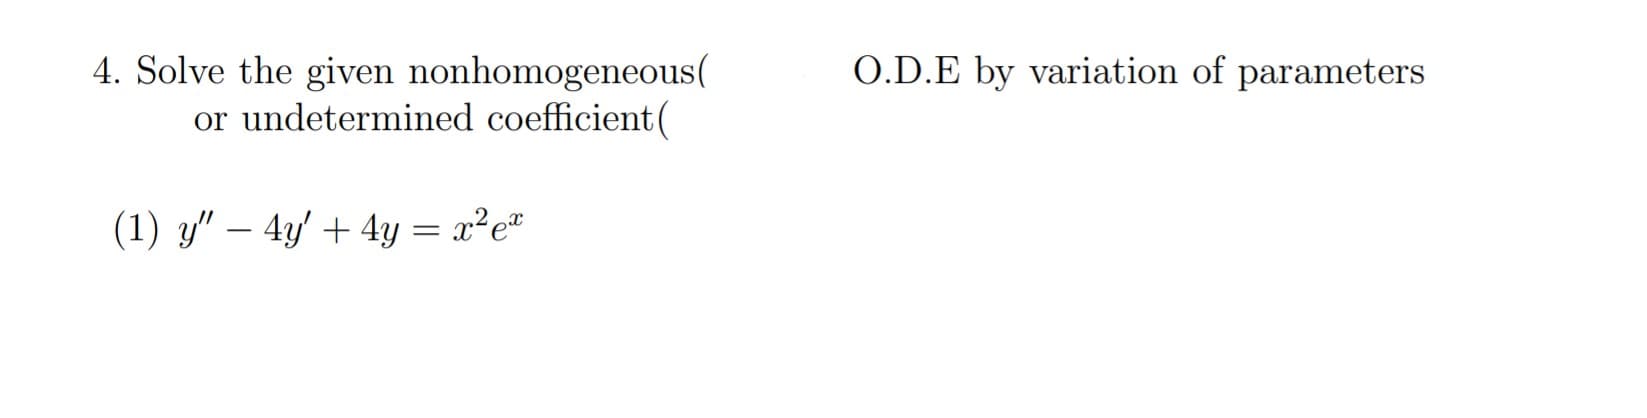 4. Solve the given nonhomogeneous(
or undetermined coefficient(
O.D.E by variation of parameters
(1) y" – 4y' + 4y = x²e*
